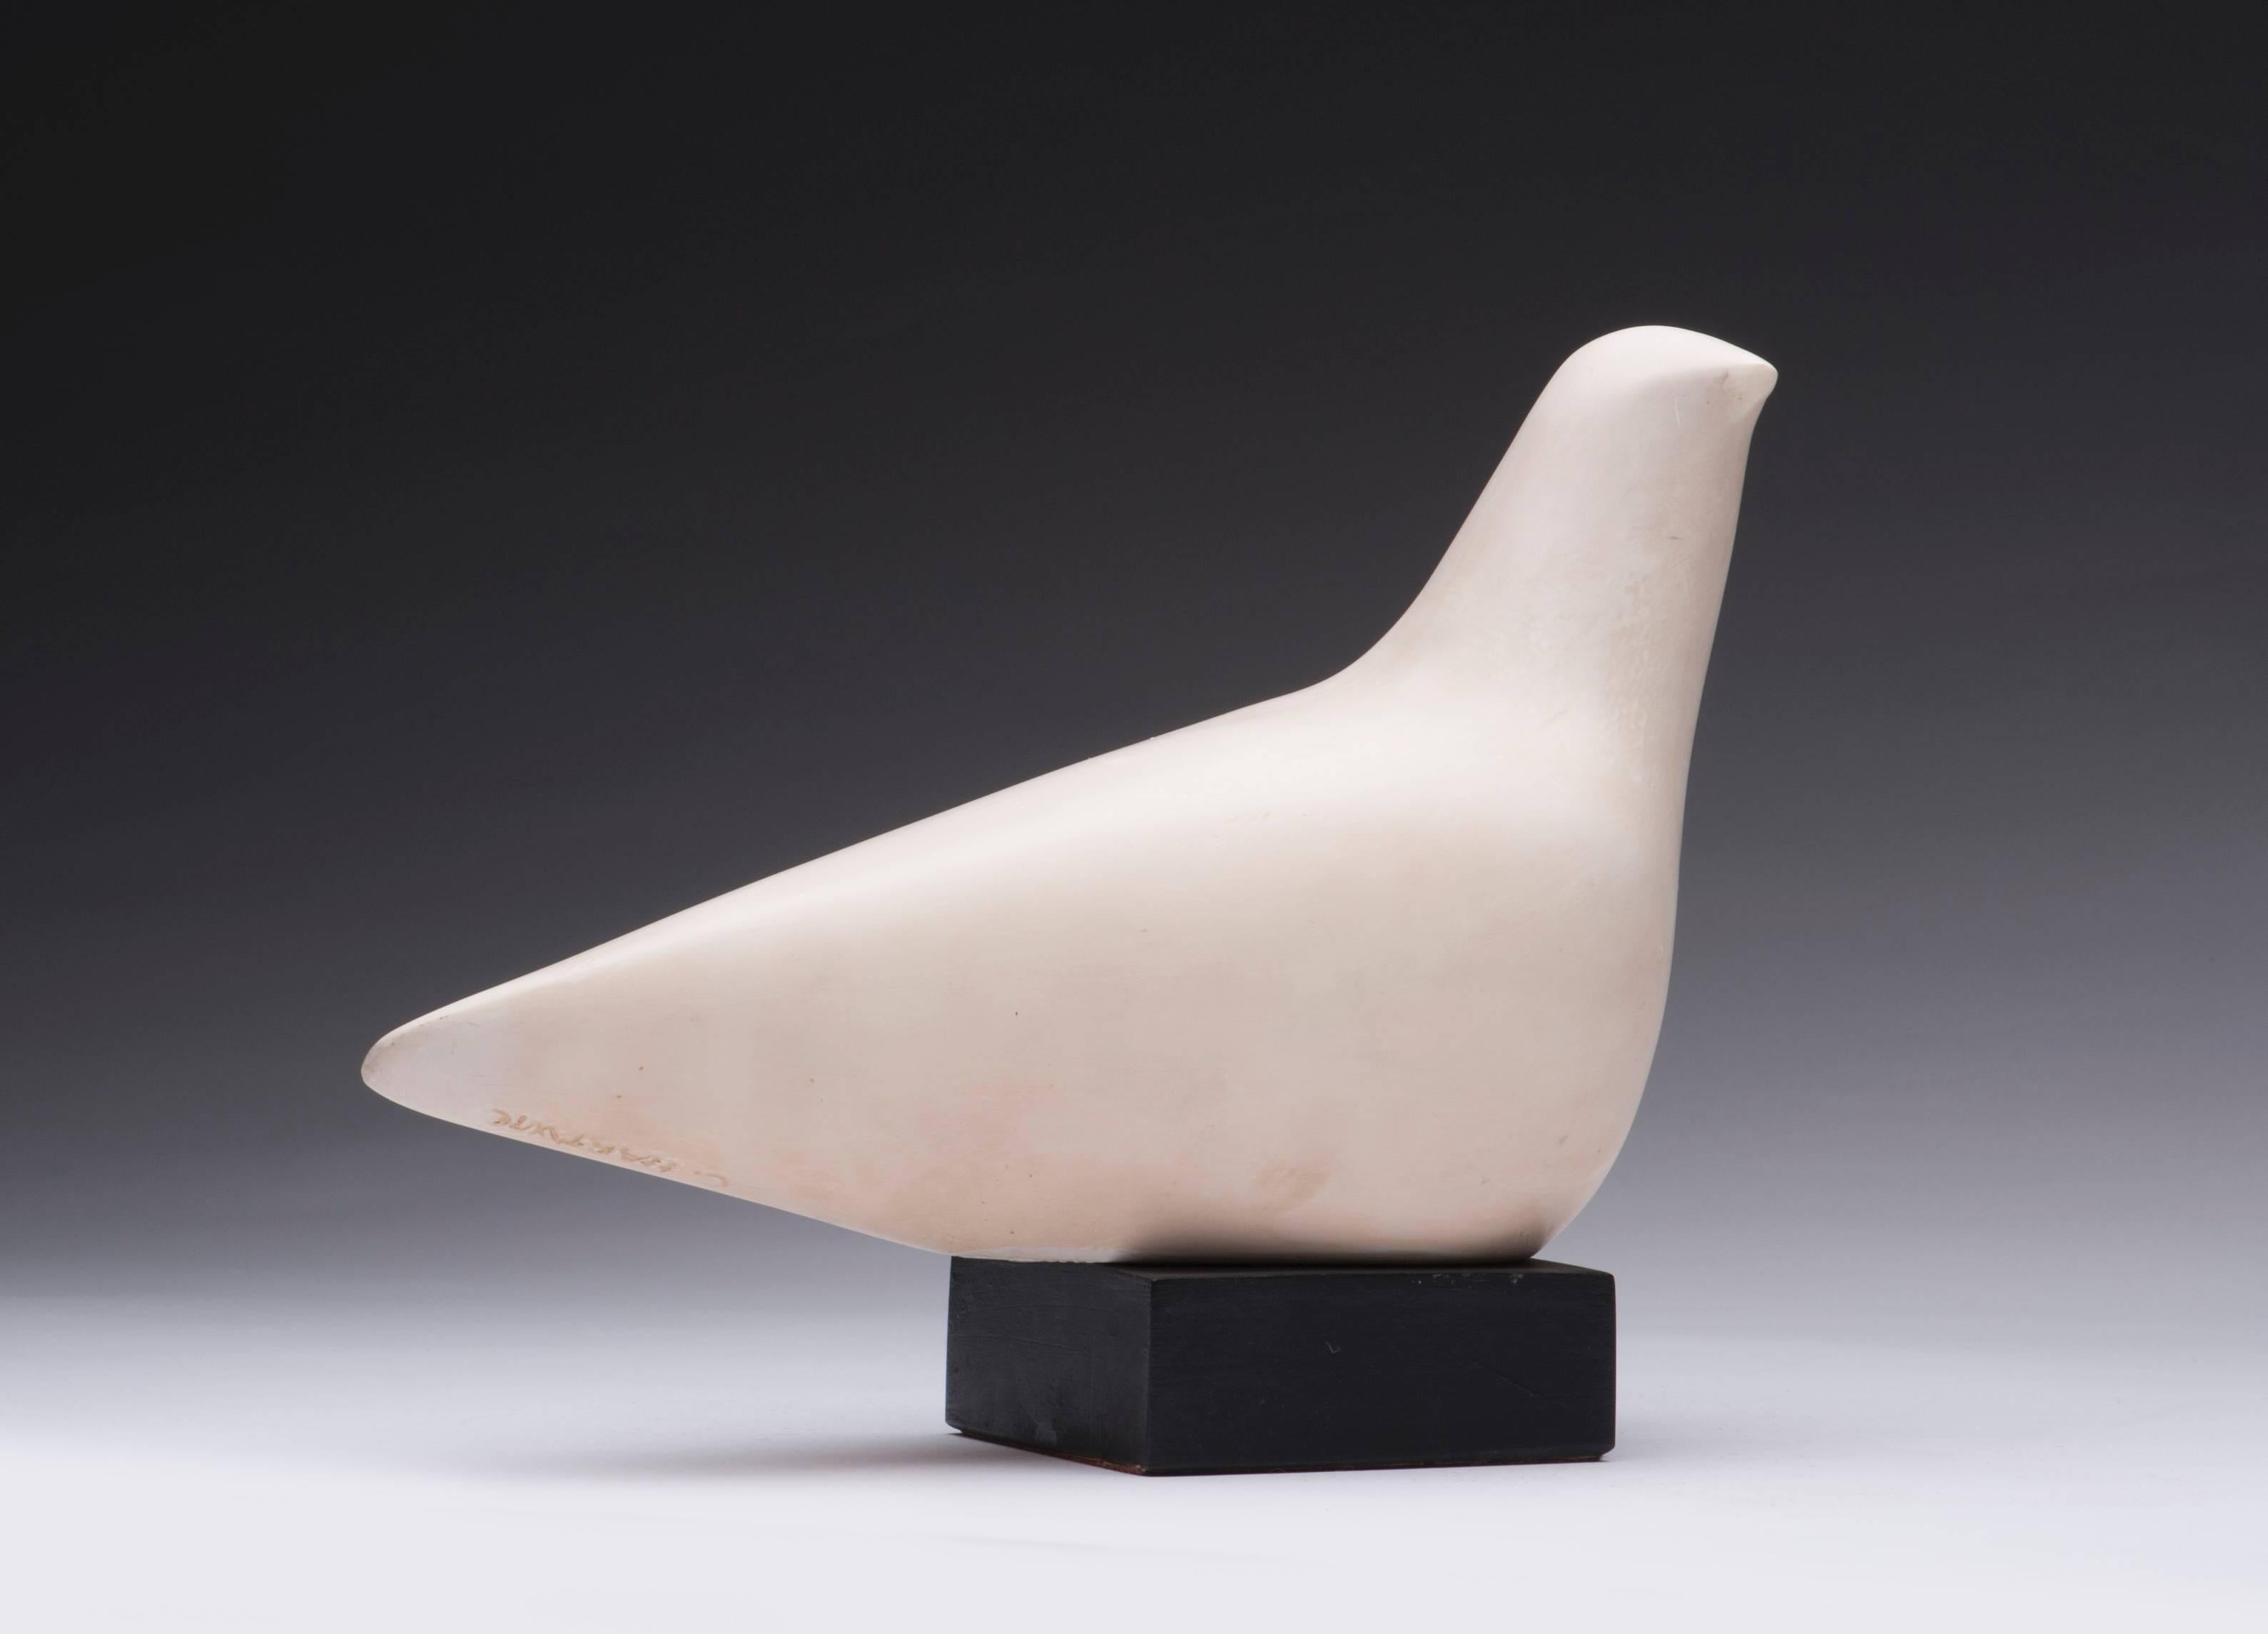 Vintage modernist abstract dove sculpture by Cleo Hartwig (1907-1988). Incised signature to underside. Cast in foundry stone, condition is excellent.